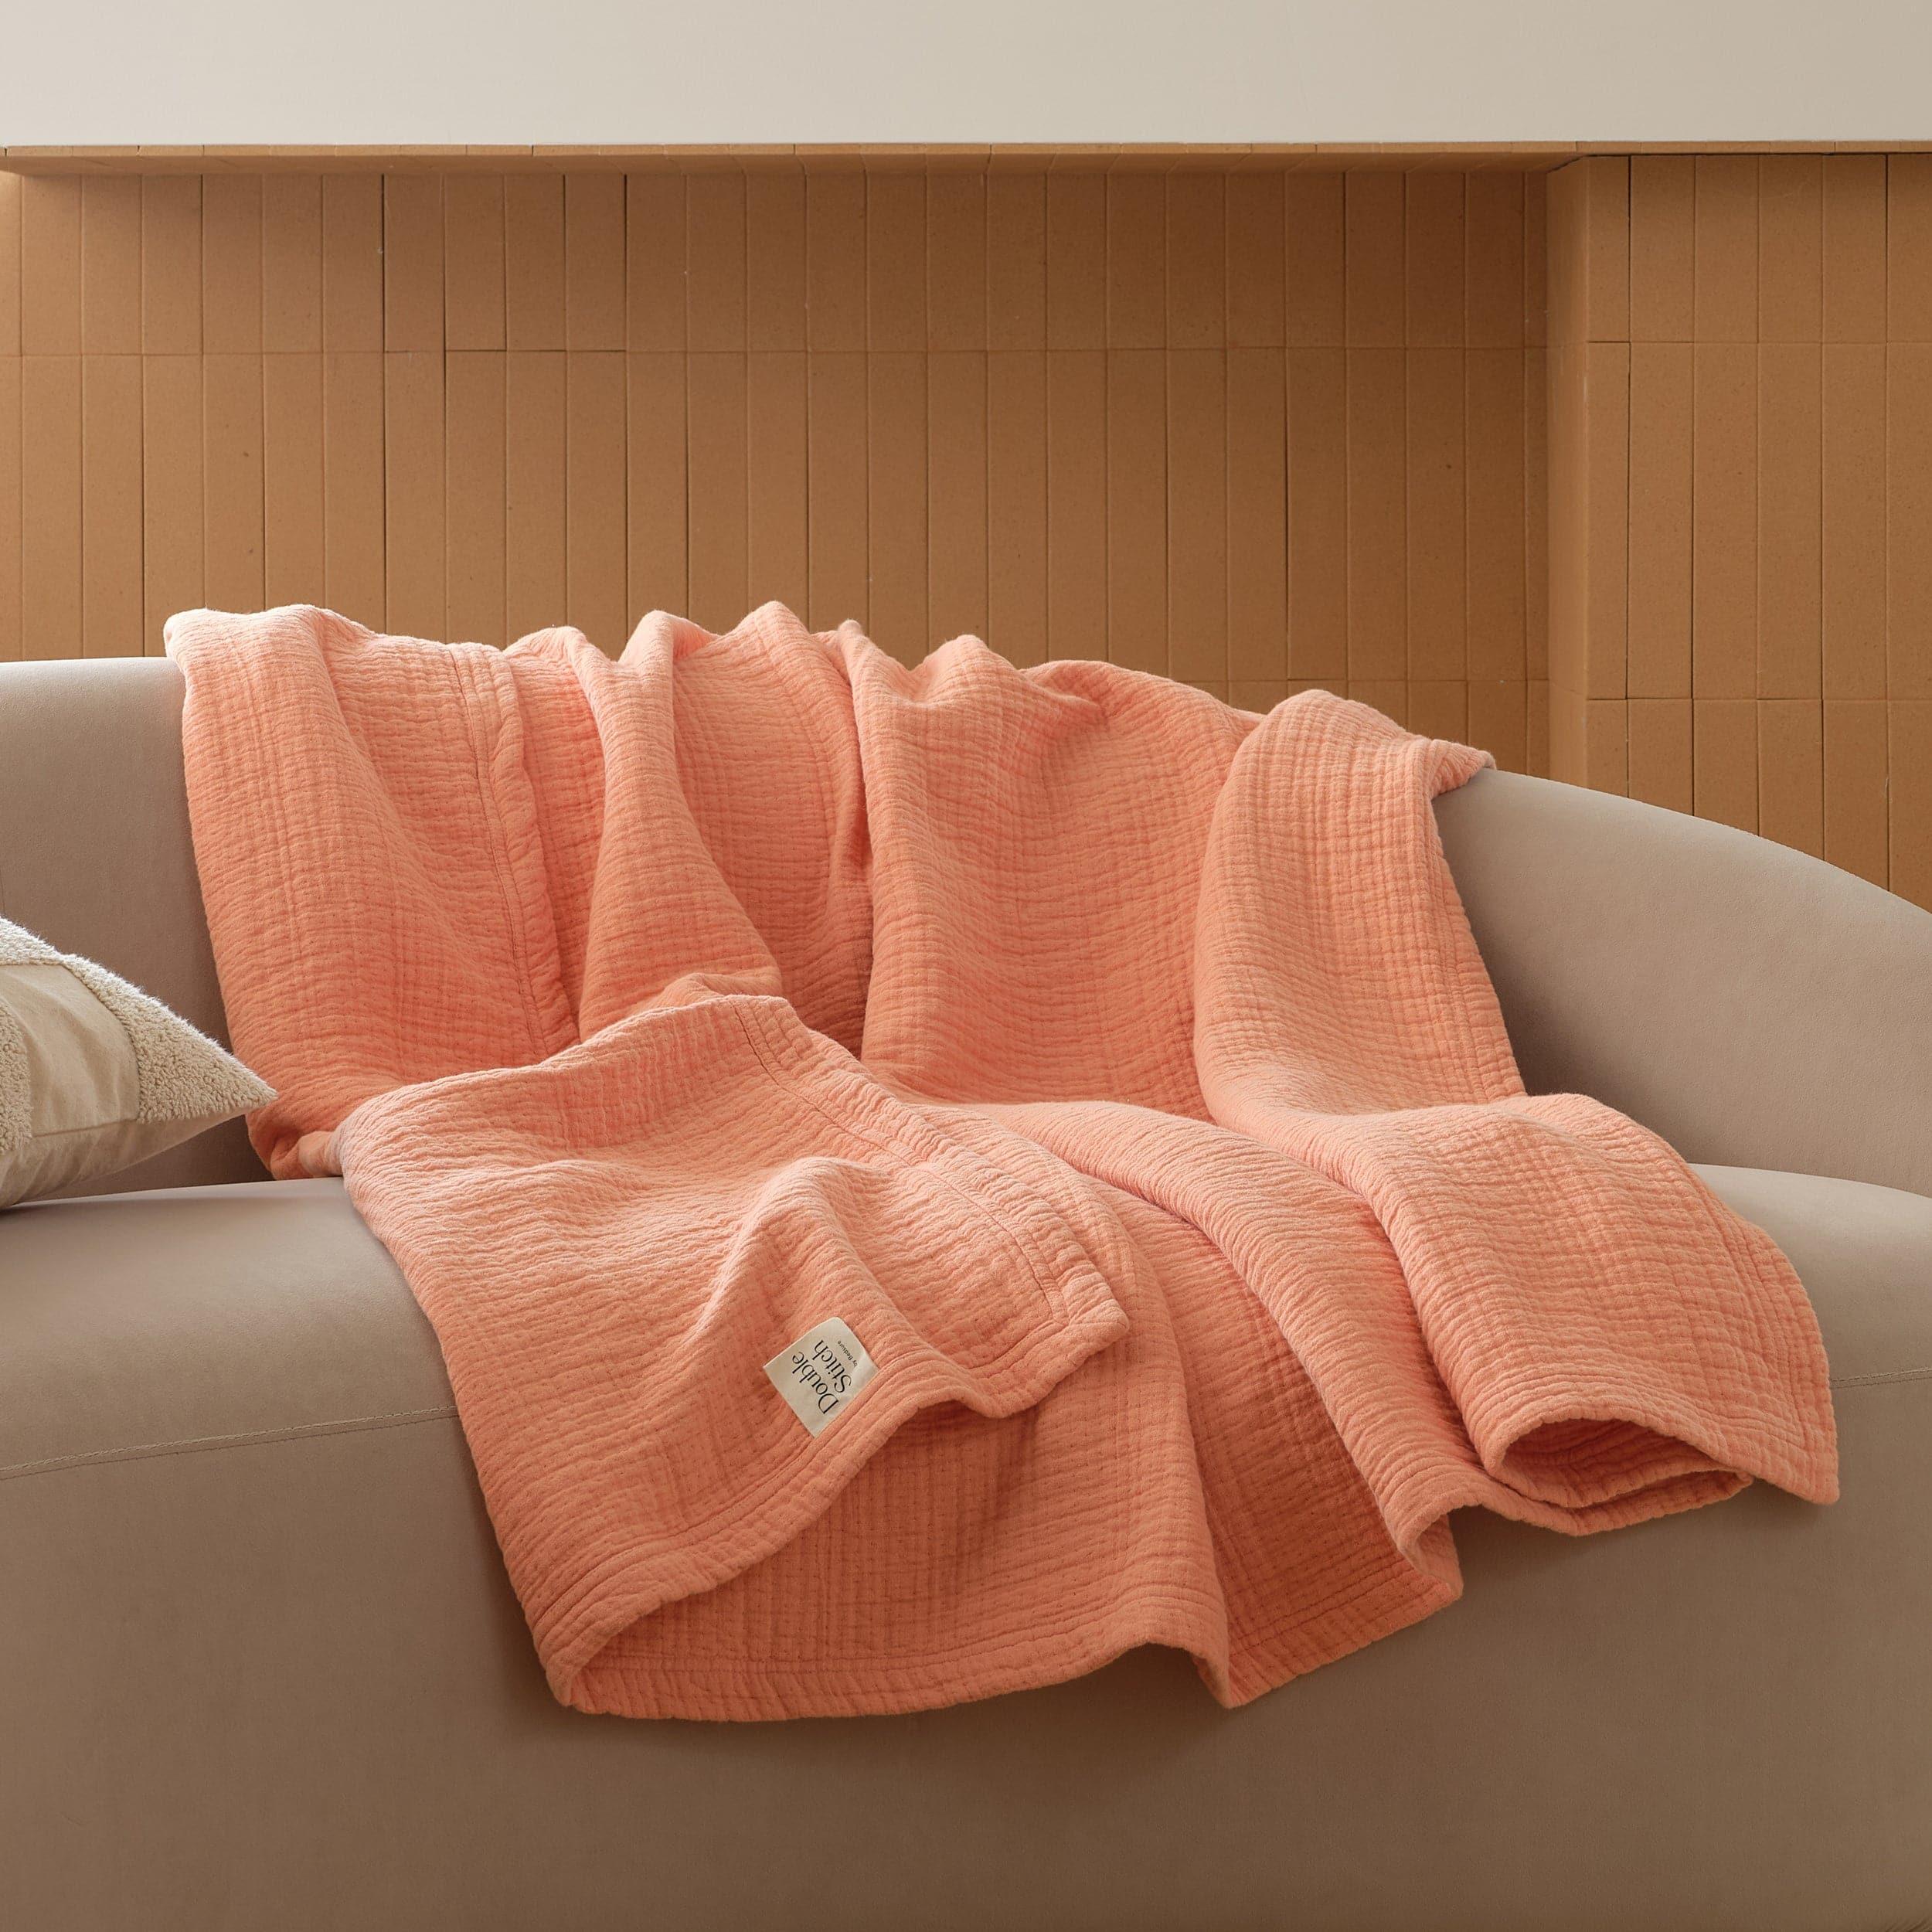 The modern throw blanket is machine washable for easy care and maintenance.